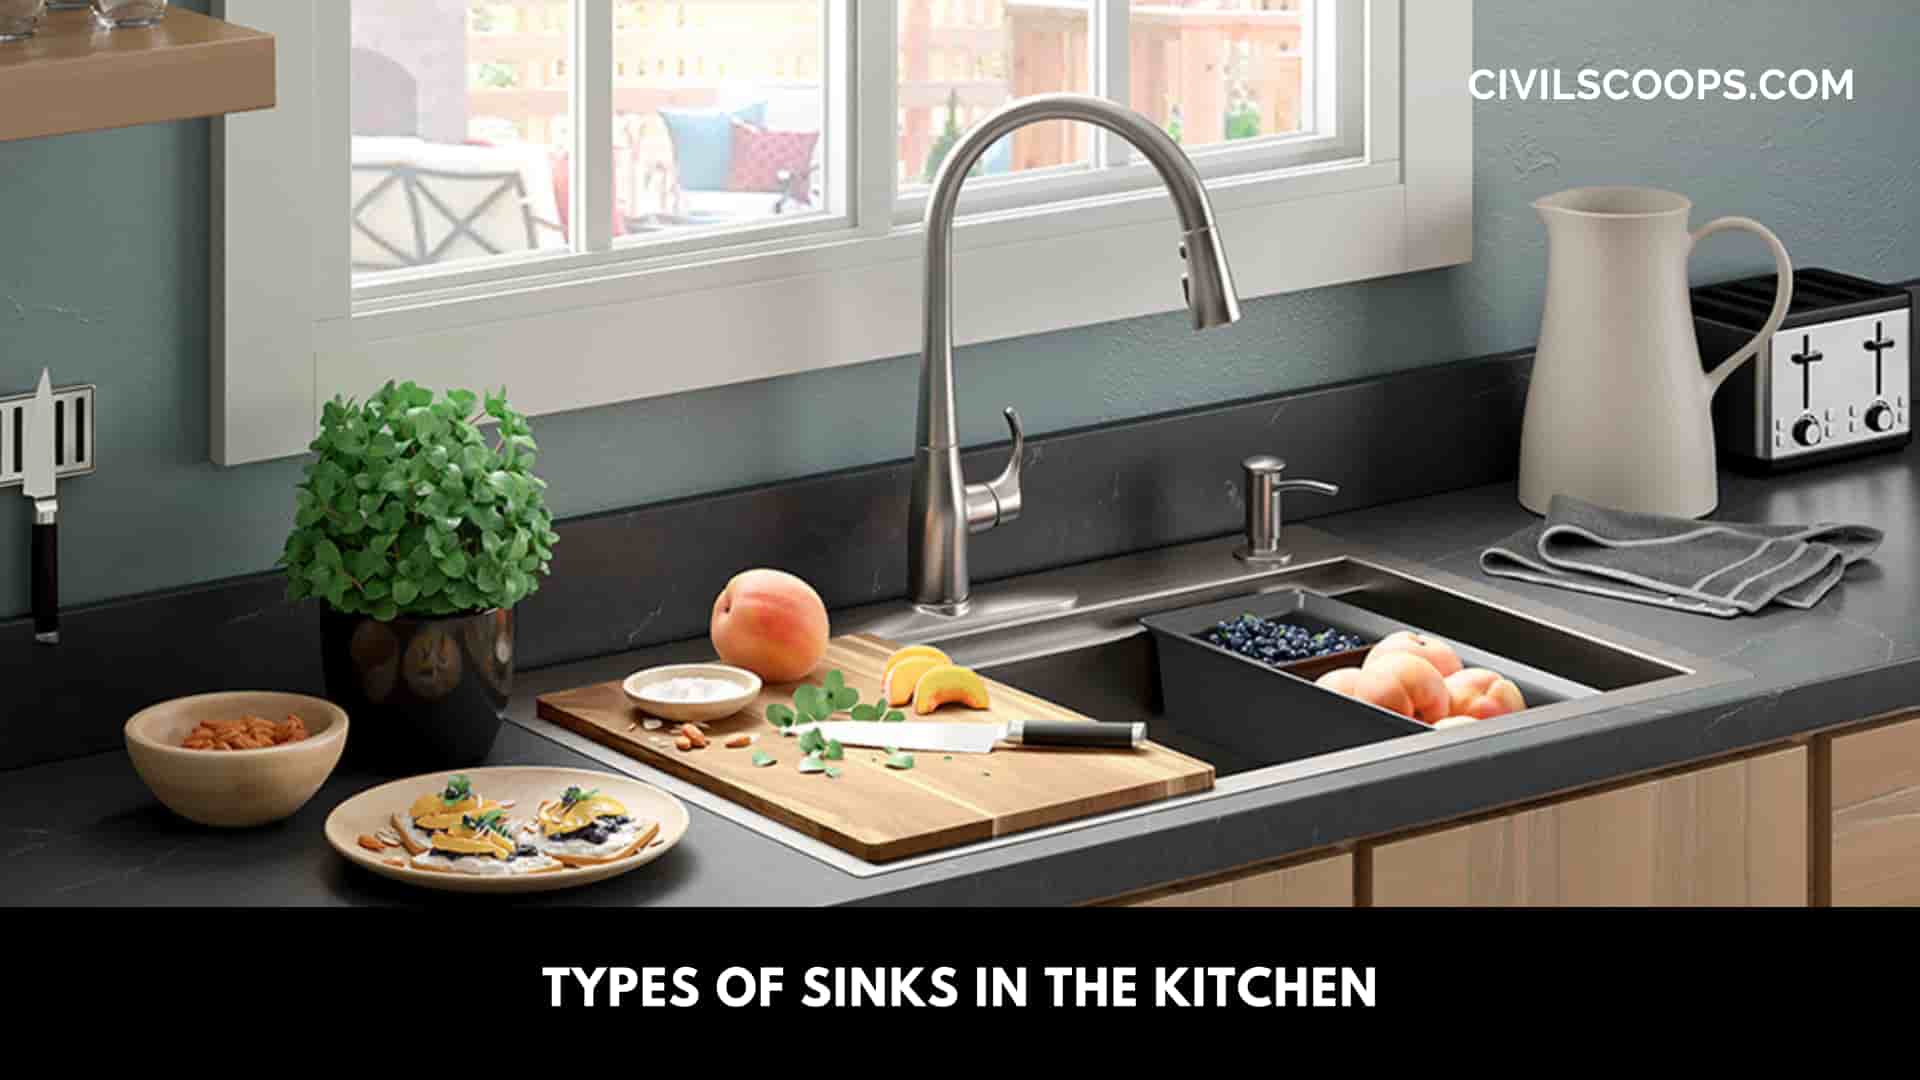 Types of Sinks in the Kitchen